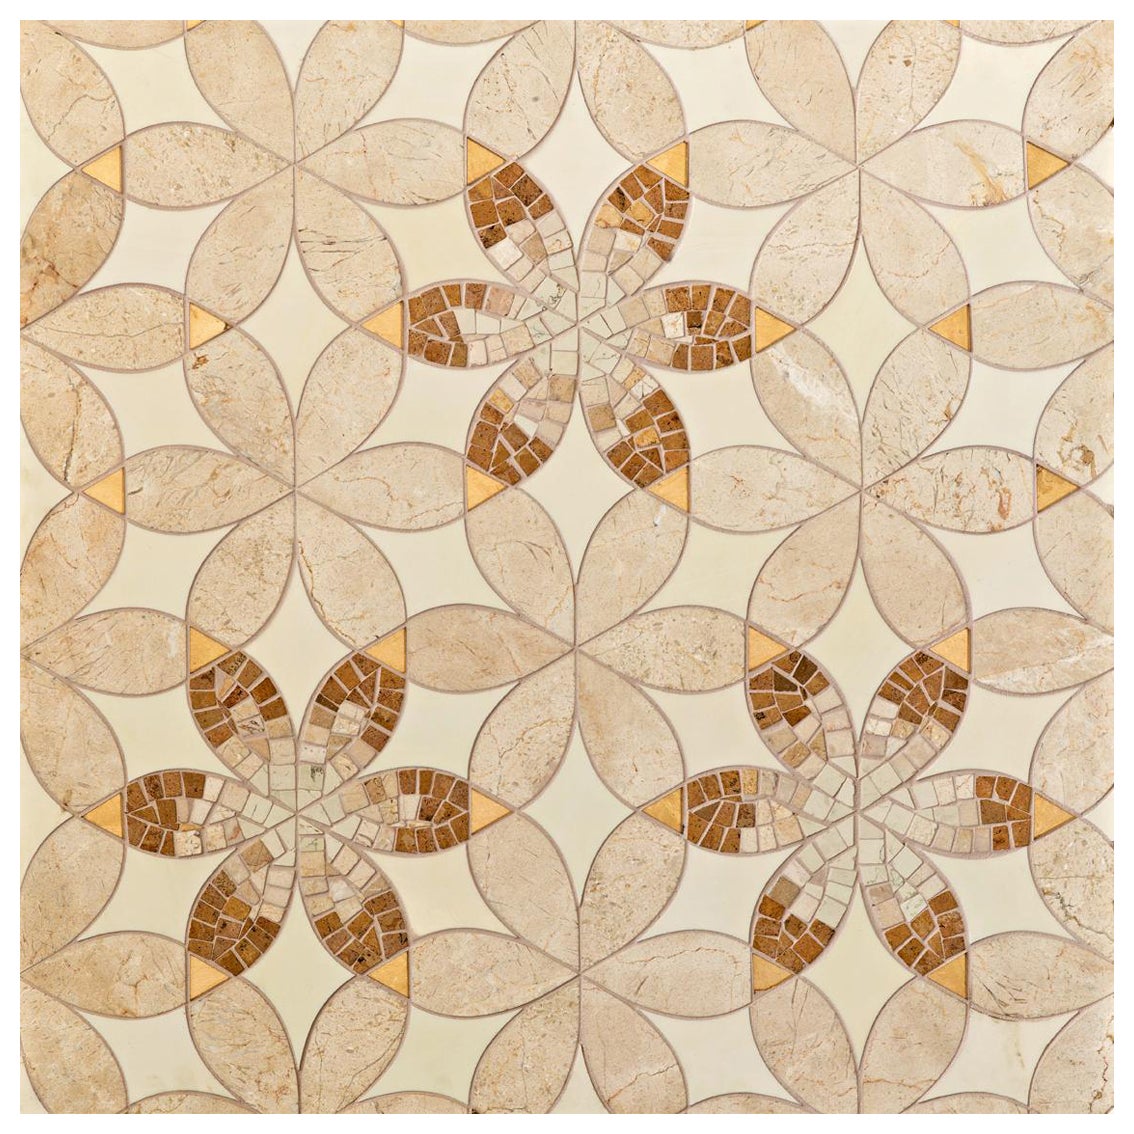 Floor Waterjet Cut Marble Tiles Available in Different Marbles Combination  For Sale